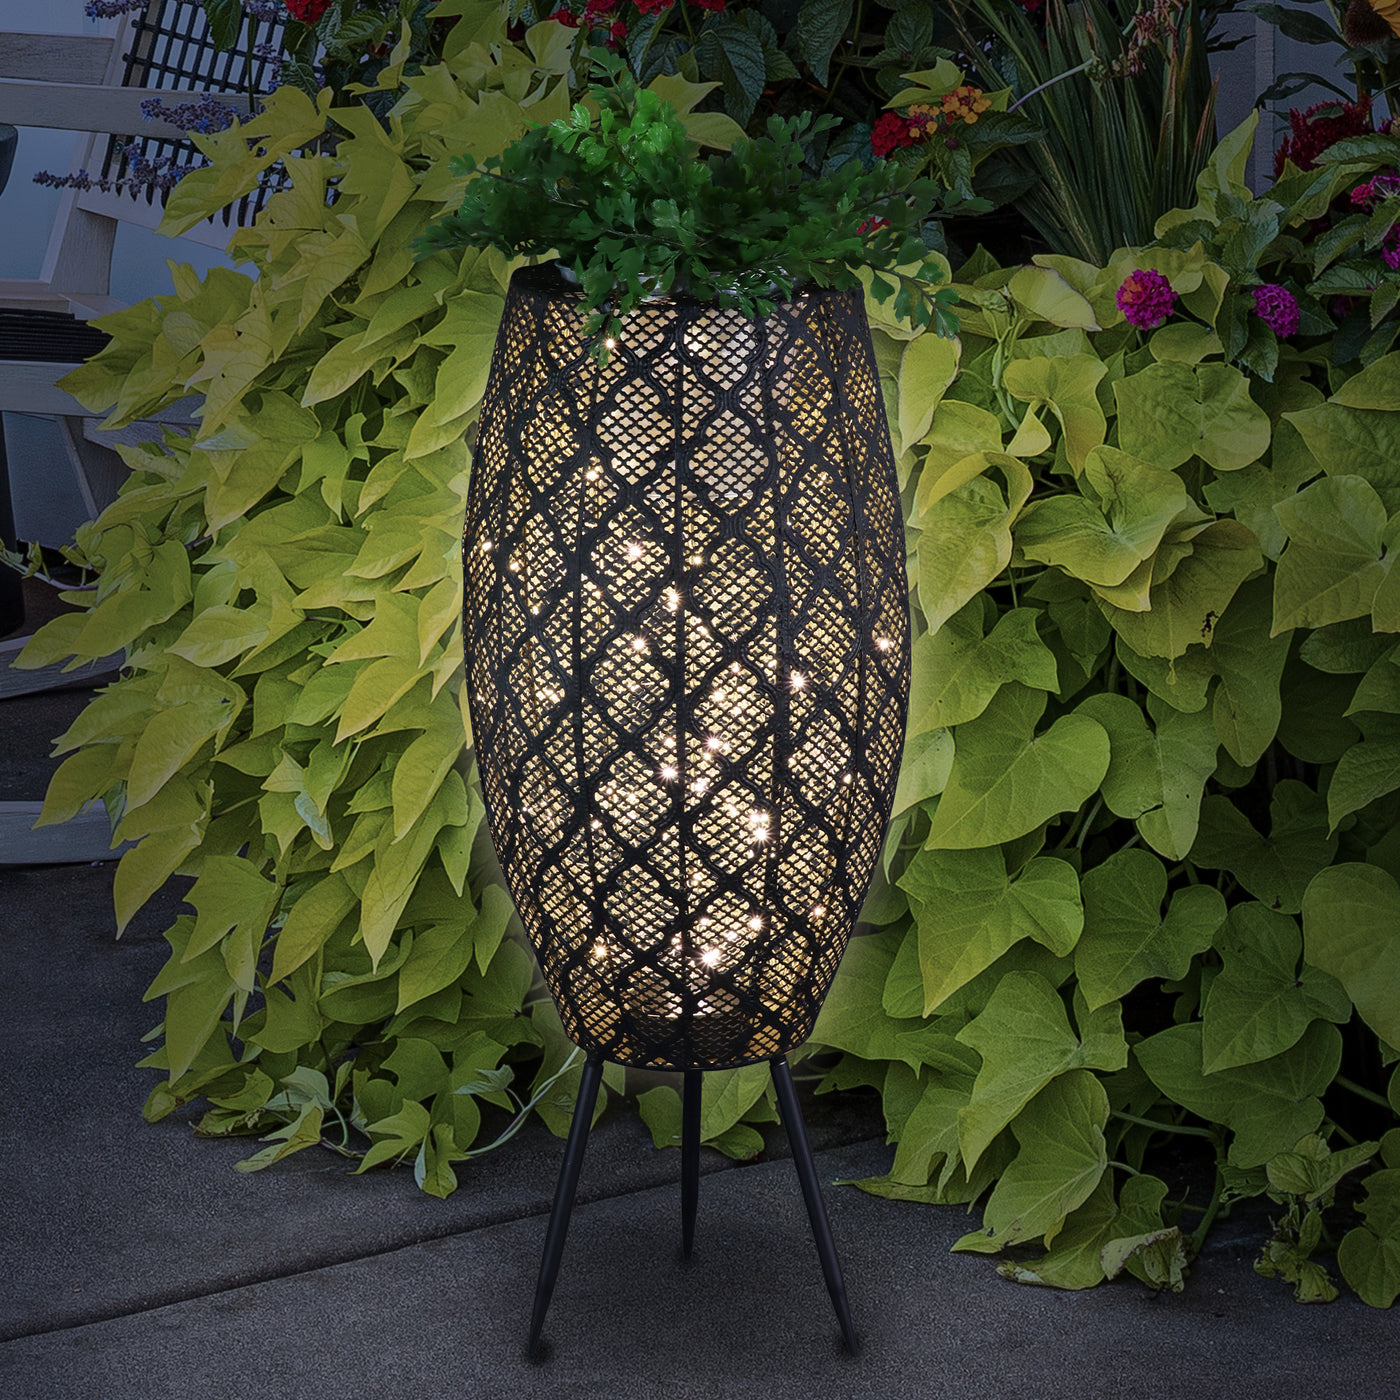 lighted flower pots and planters